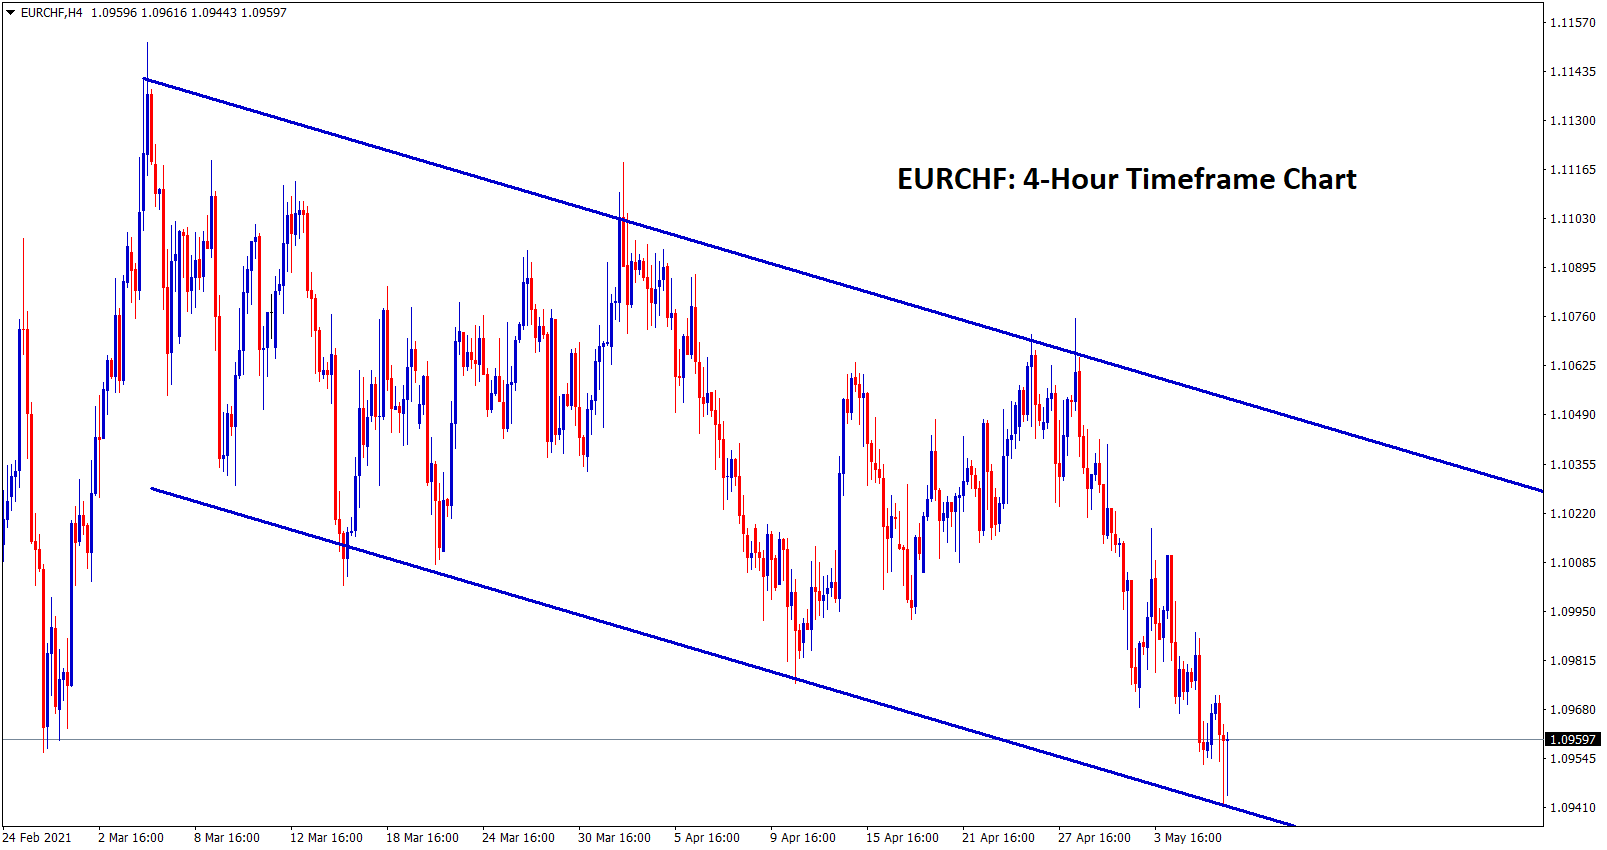 EURCHF reached the bottom level of the descending channel in H4